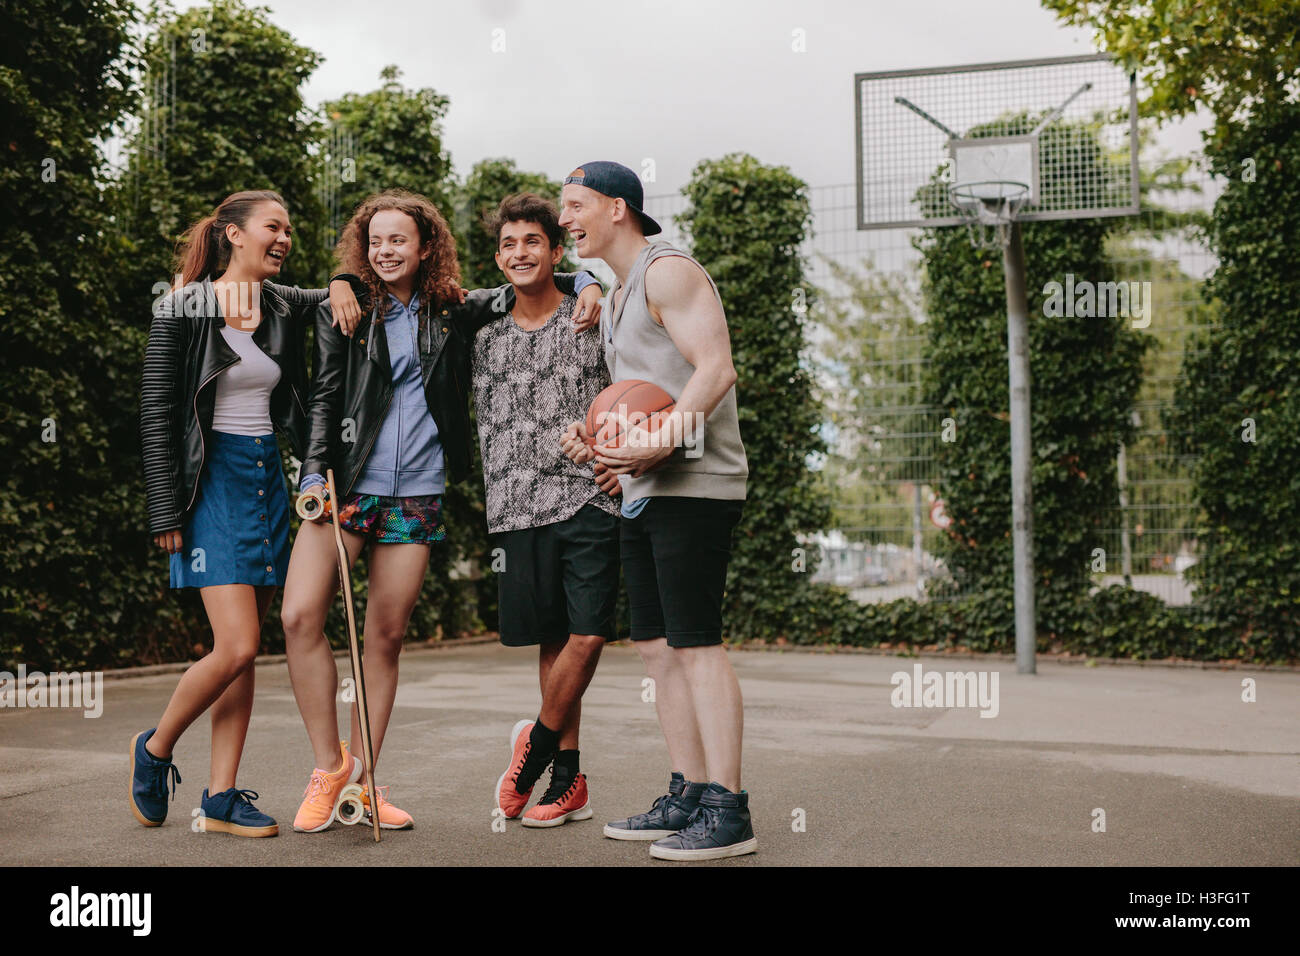 Full length shot of multiracial group of people enjoying outdoors on basketball court. Four young friends standing together and Stock Photo